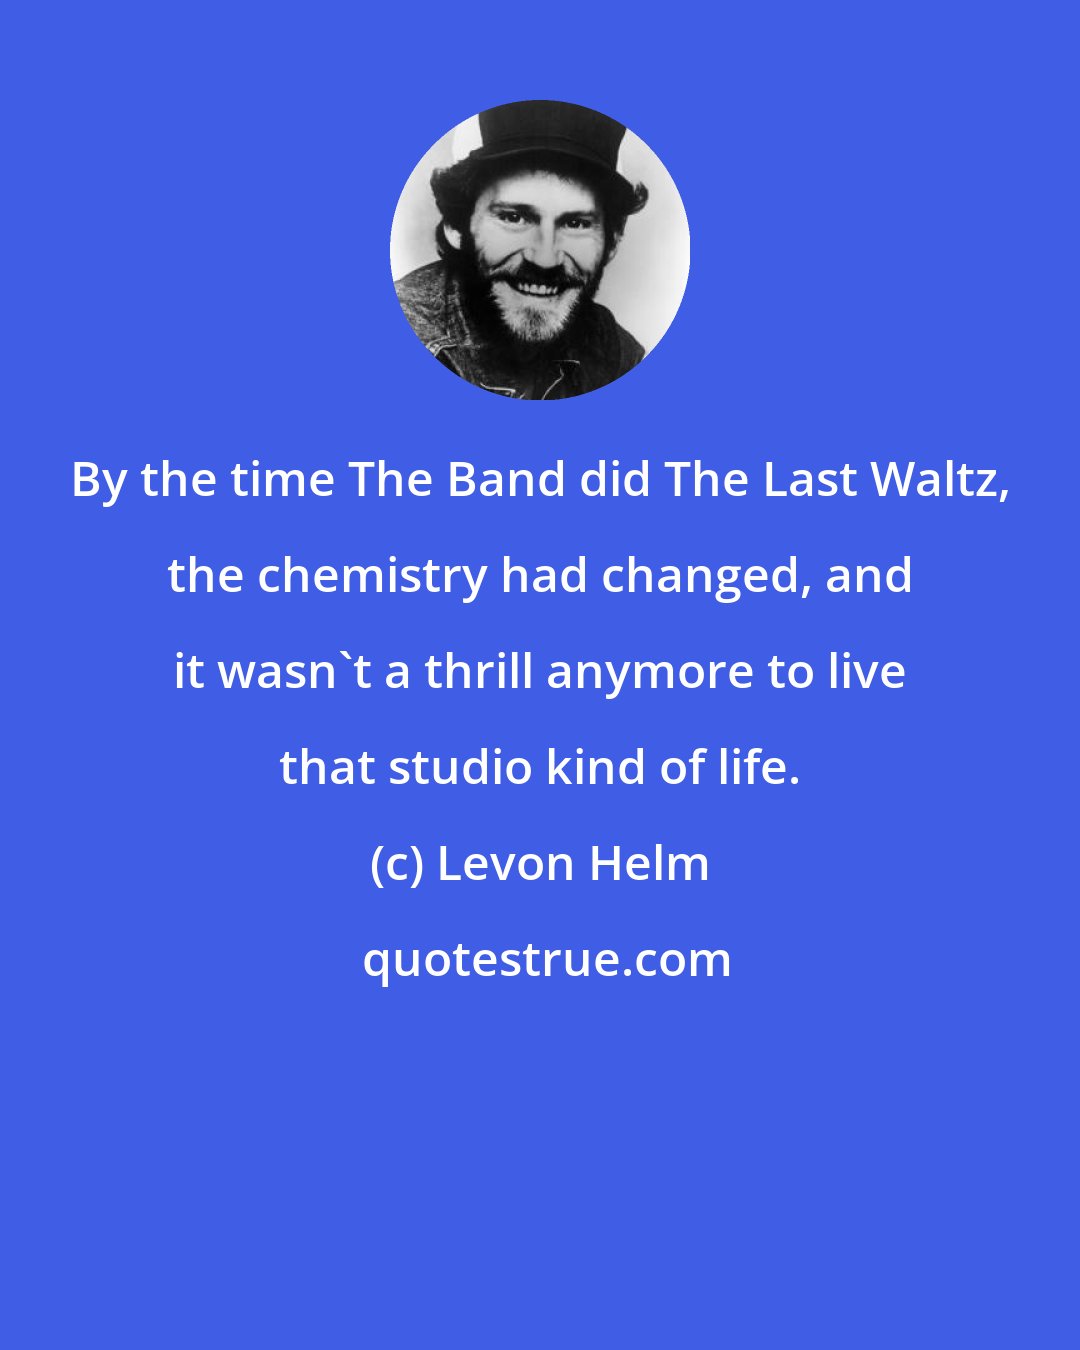 Levon Helm: By the time The Band did The Last Waltz, the chemistry had changed, and it wasn't a thrill anymore to live that studio kind of life.